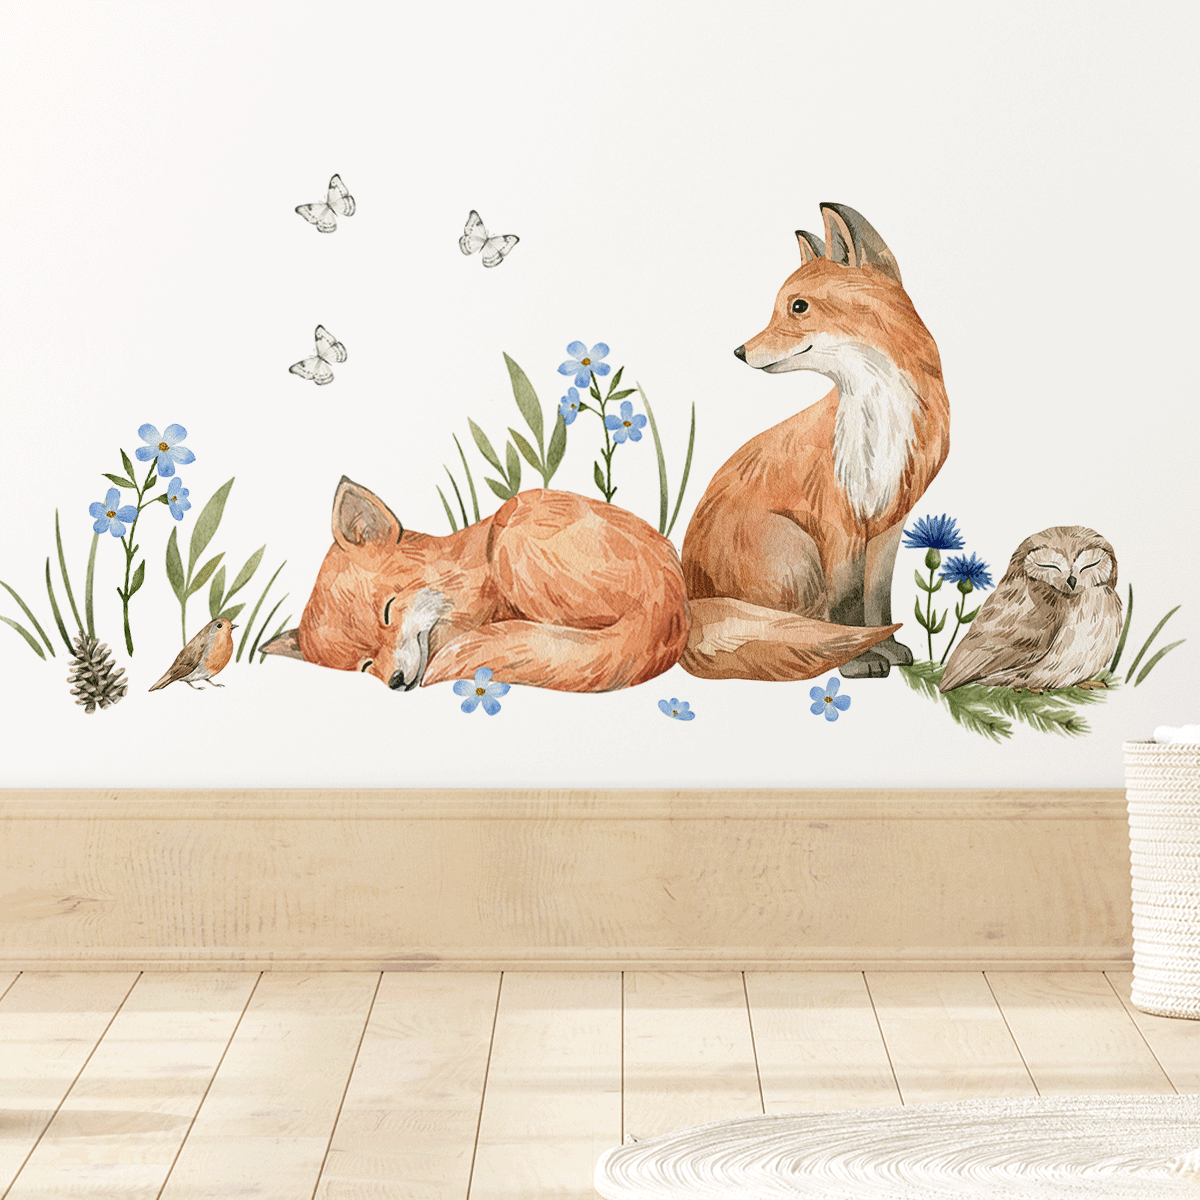 Woodland wall stickers - Magical forest - foxes